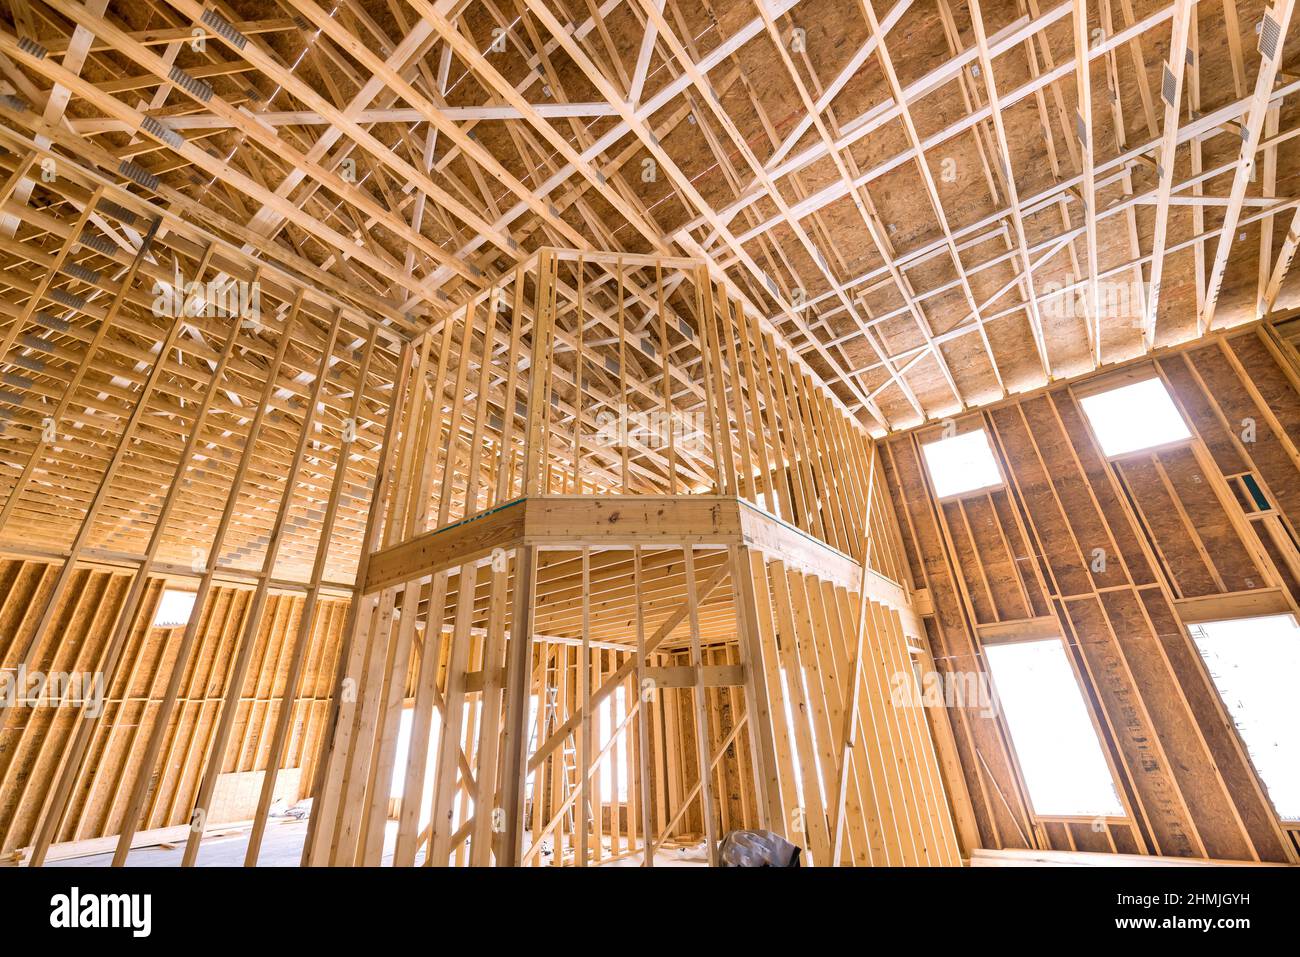 Framing beams view of wood framework a new wooden house under construction Stock Photo